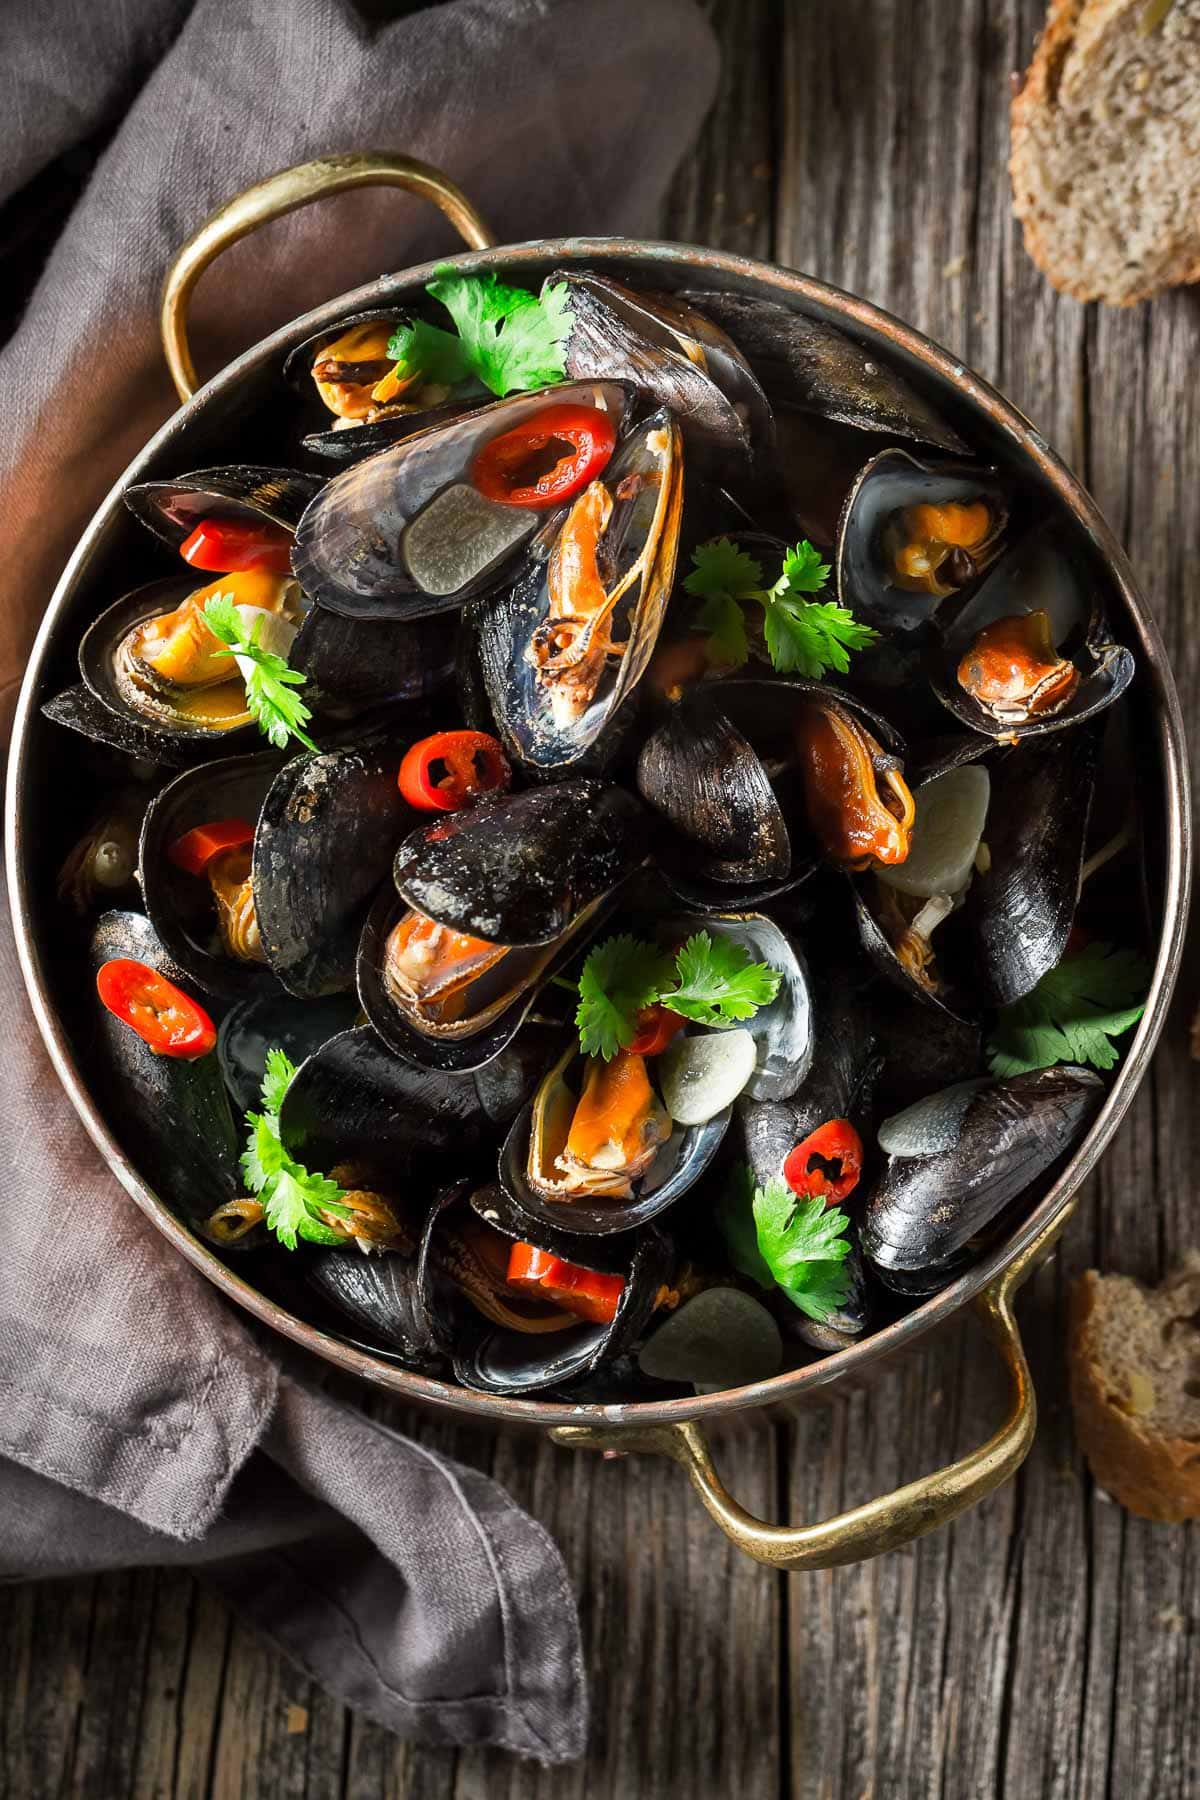 An overhead shot of a copper pot filled with steamed mussels garnished with red chili peppers and cilantro on a wooden board with sliced bread and a gray napkin on the side.